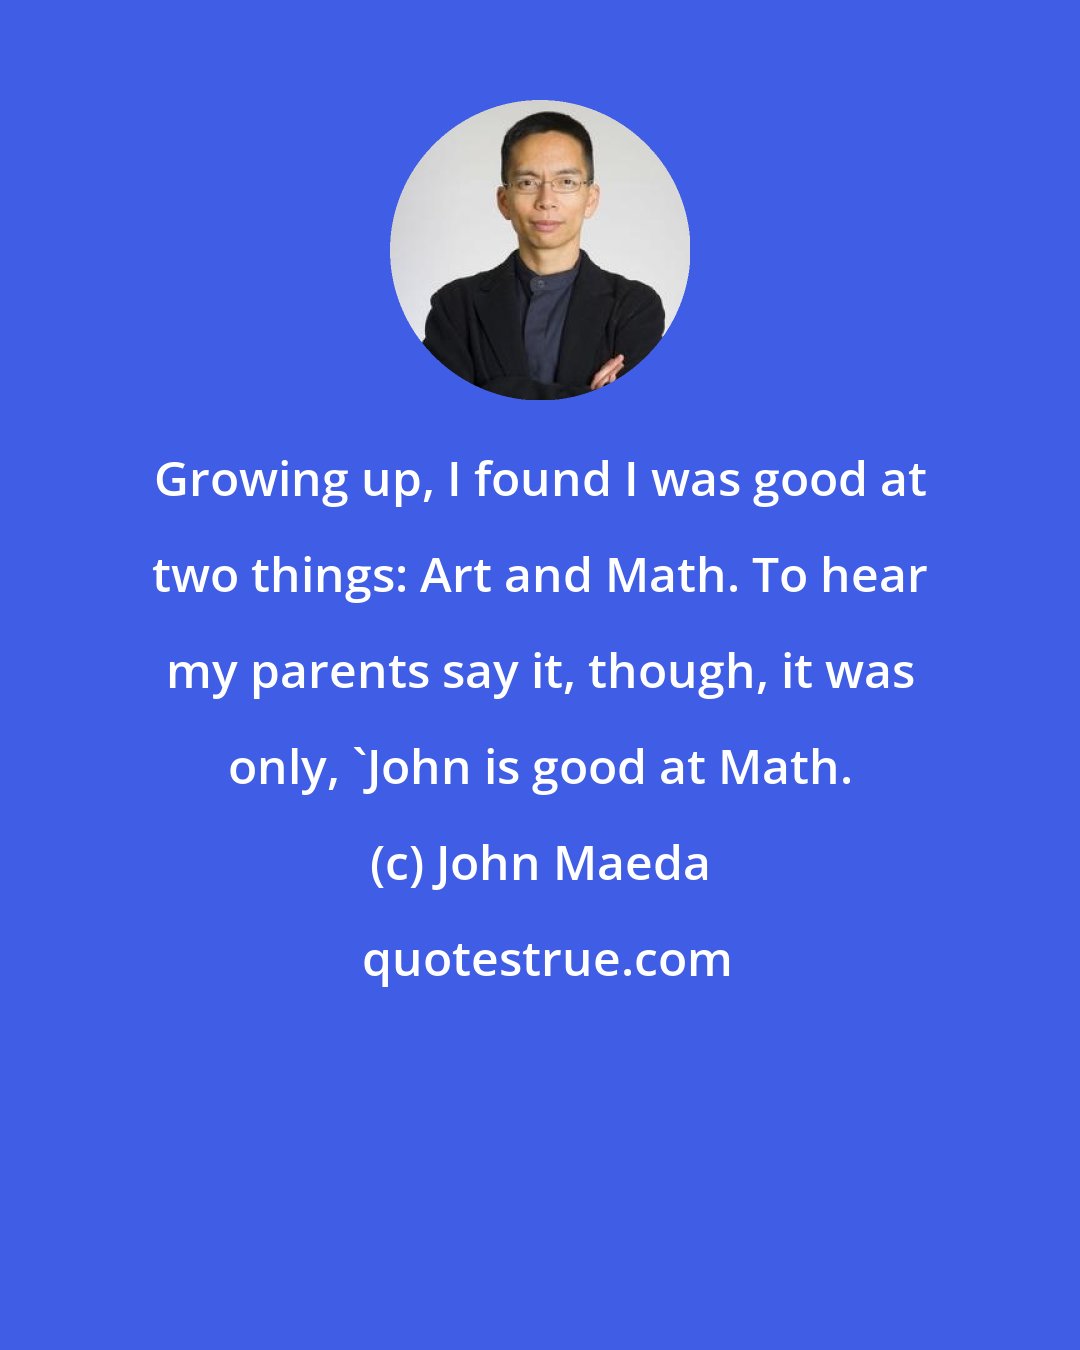 John Maeda: Growing up, I found I was good at two things: Art and Math. To hear my parents say it, though, it was only, 'John is good at Math.